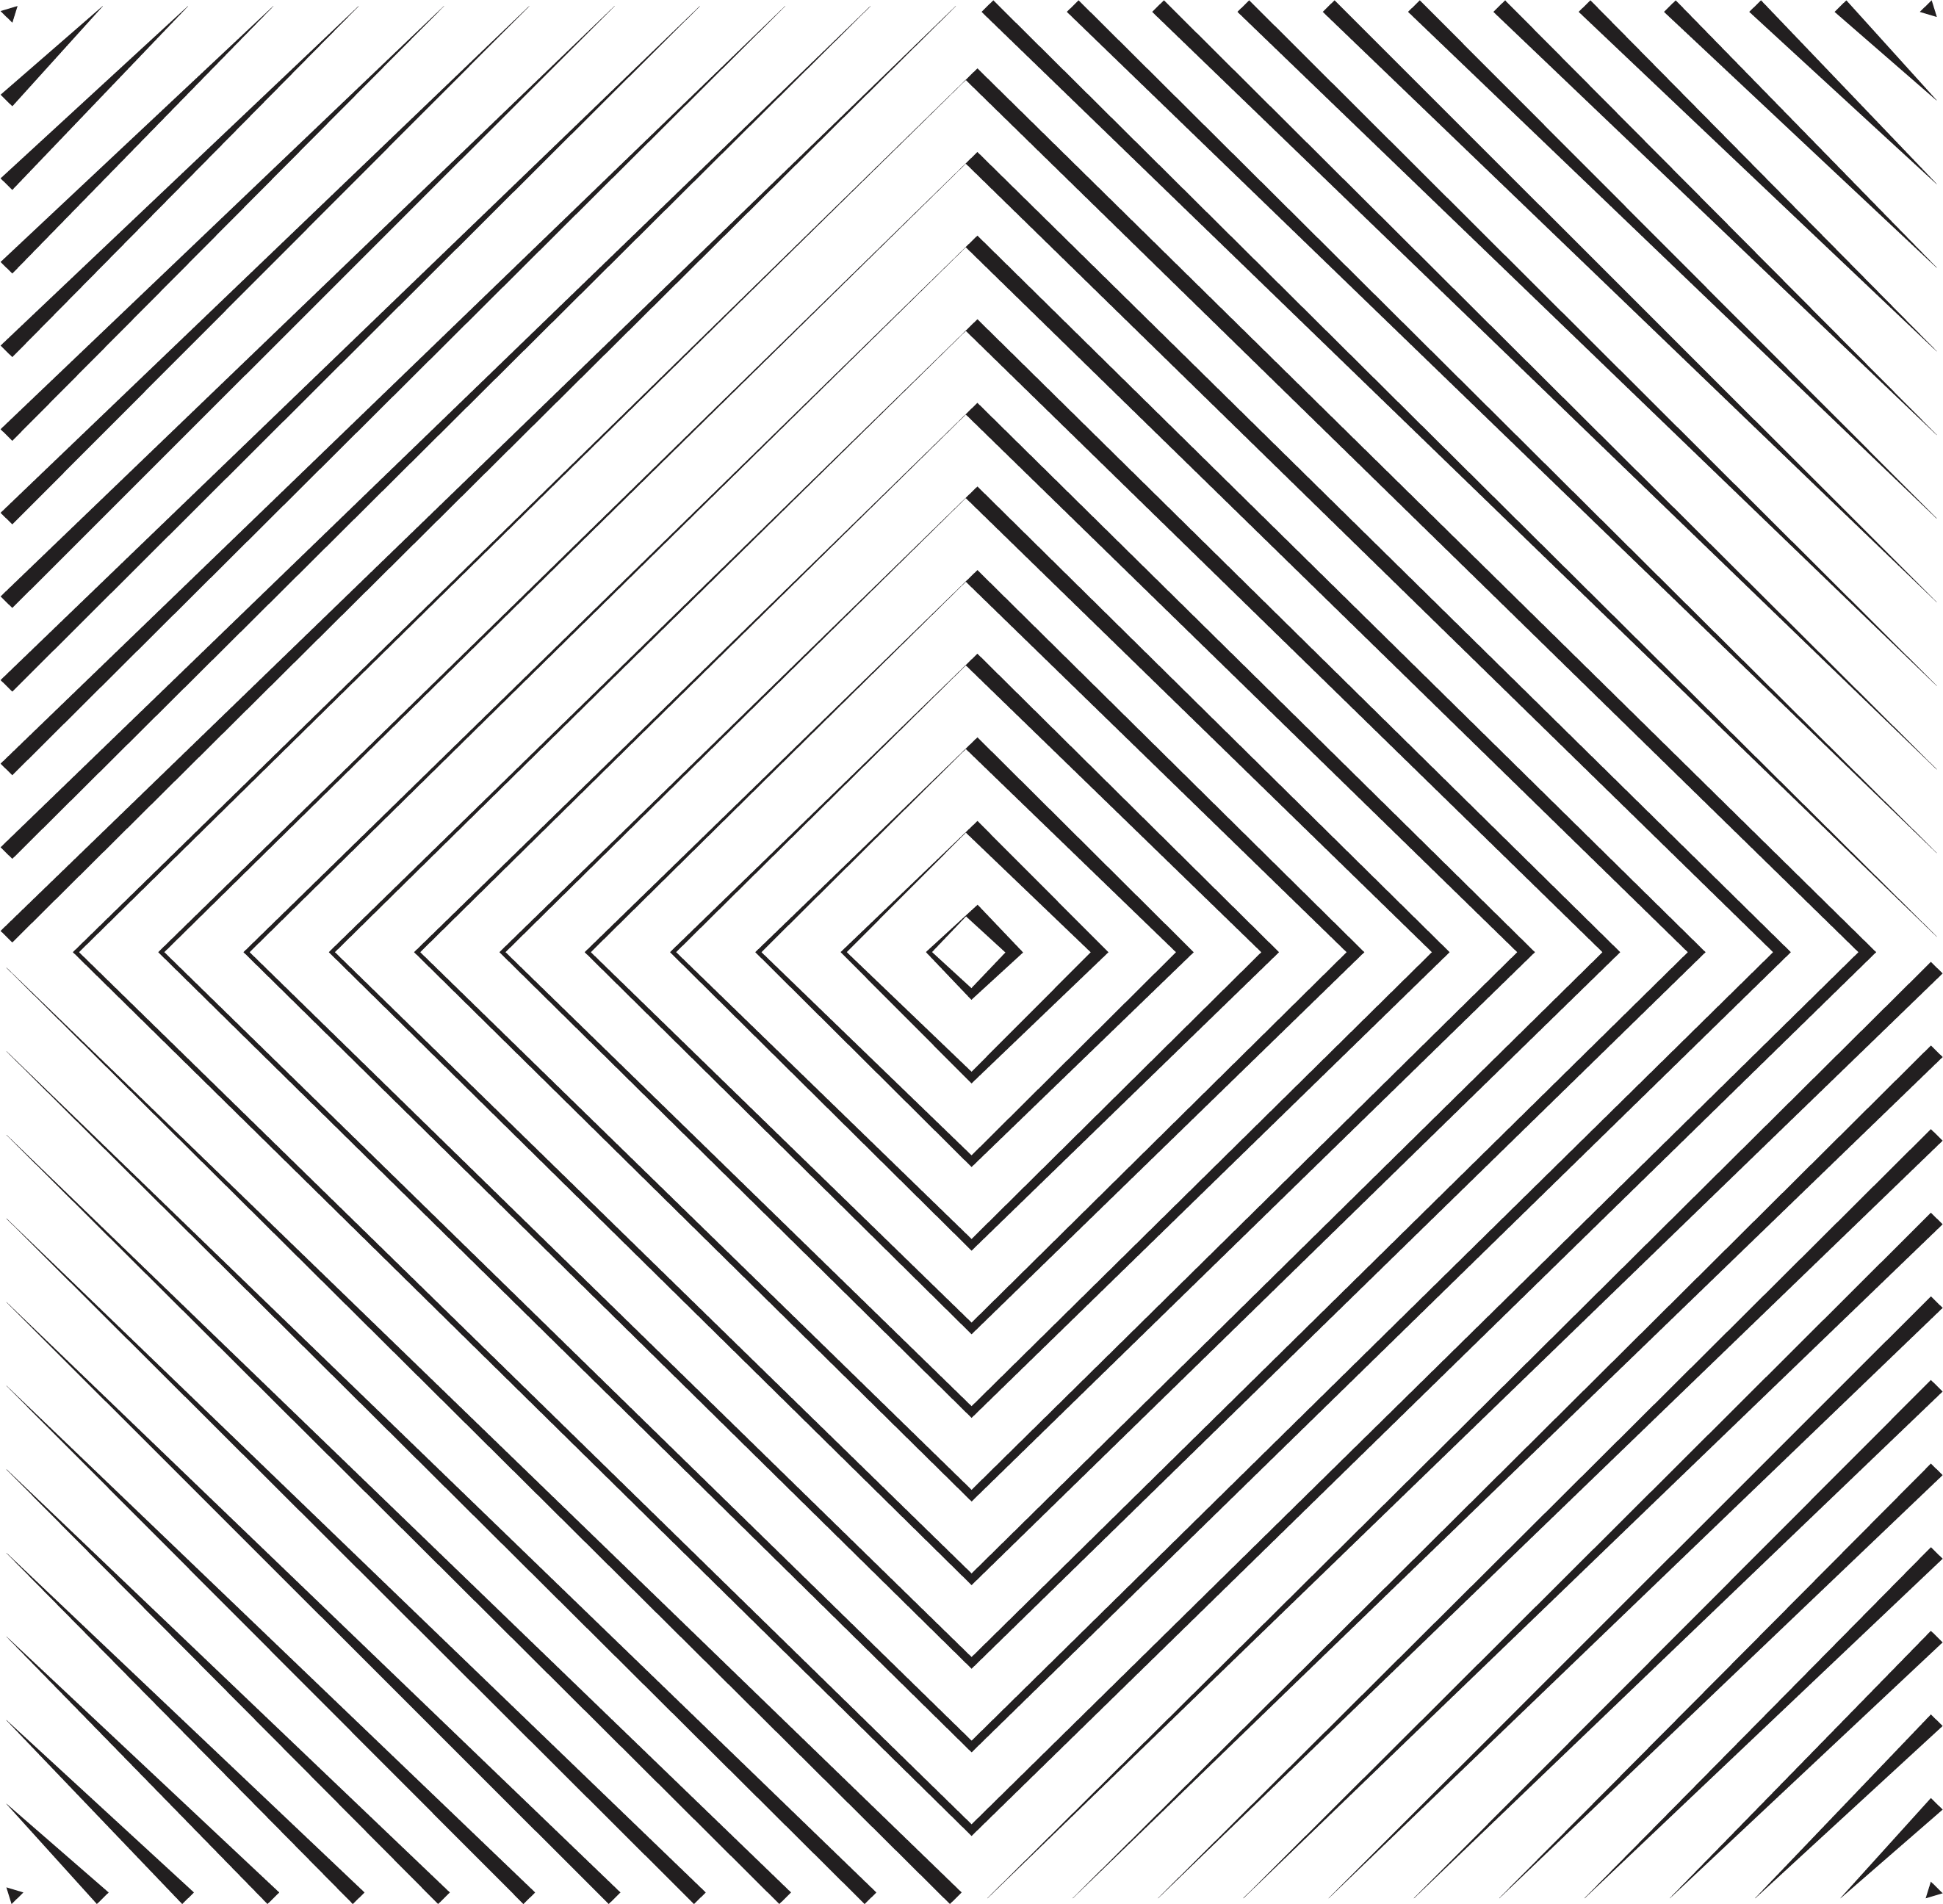 Geometry Optical Square Illusion Symmetry Free Download Image PNG Image